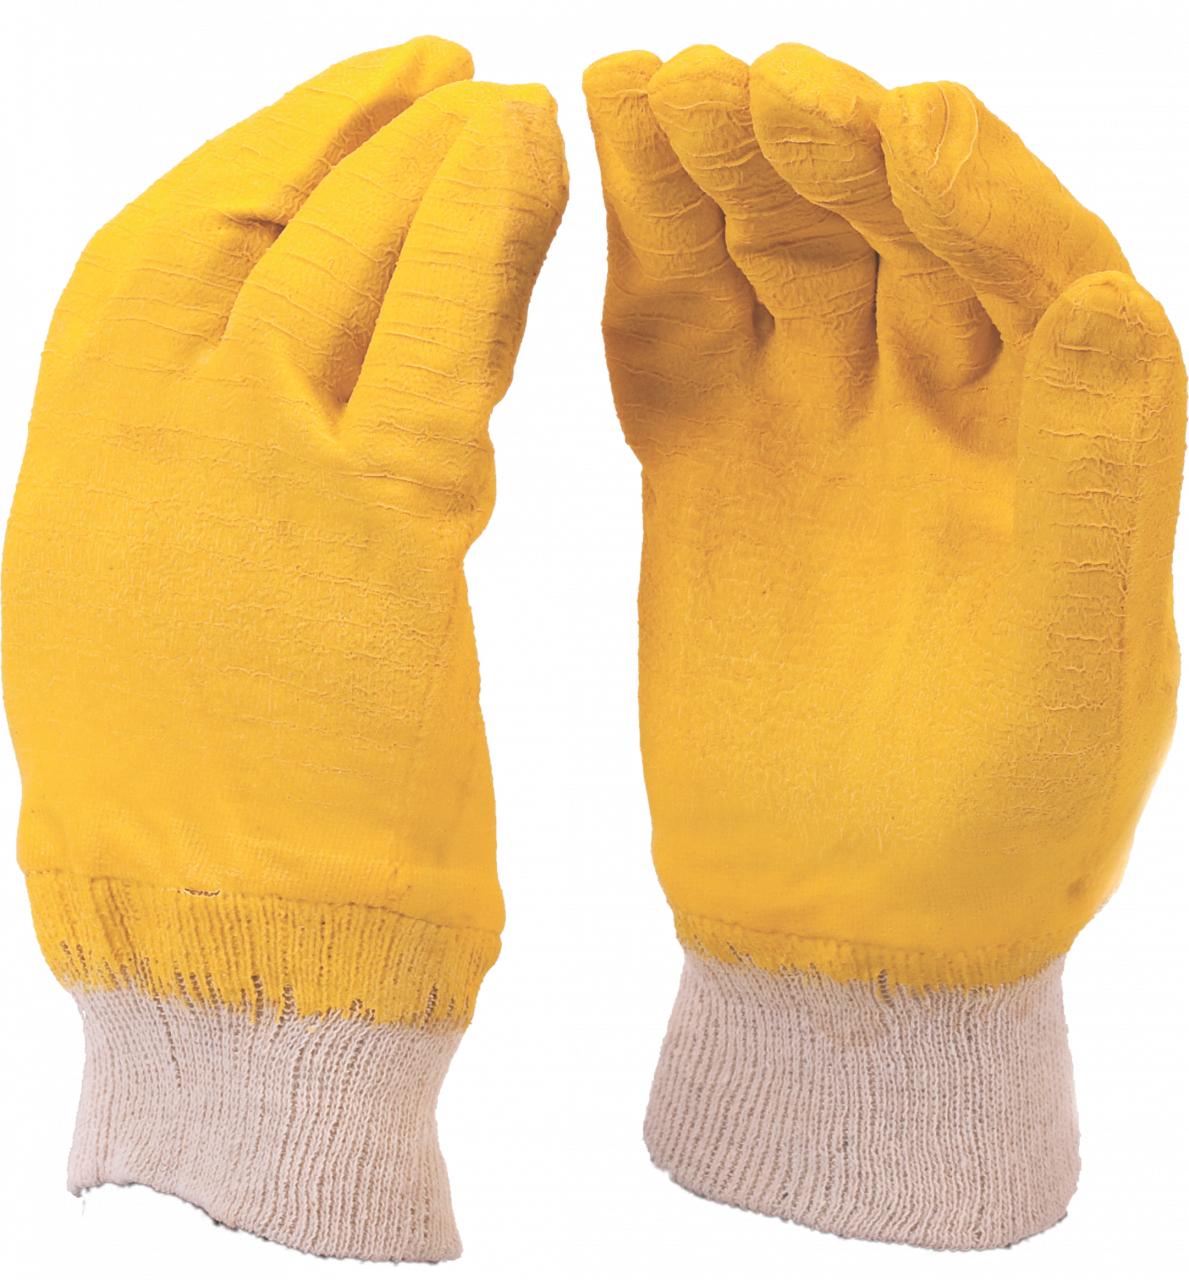 Latex Glove Commarex Fully Dipped Yellow 40Cm